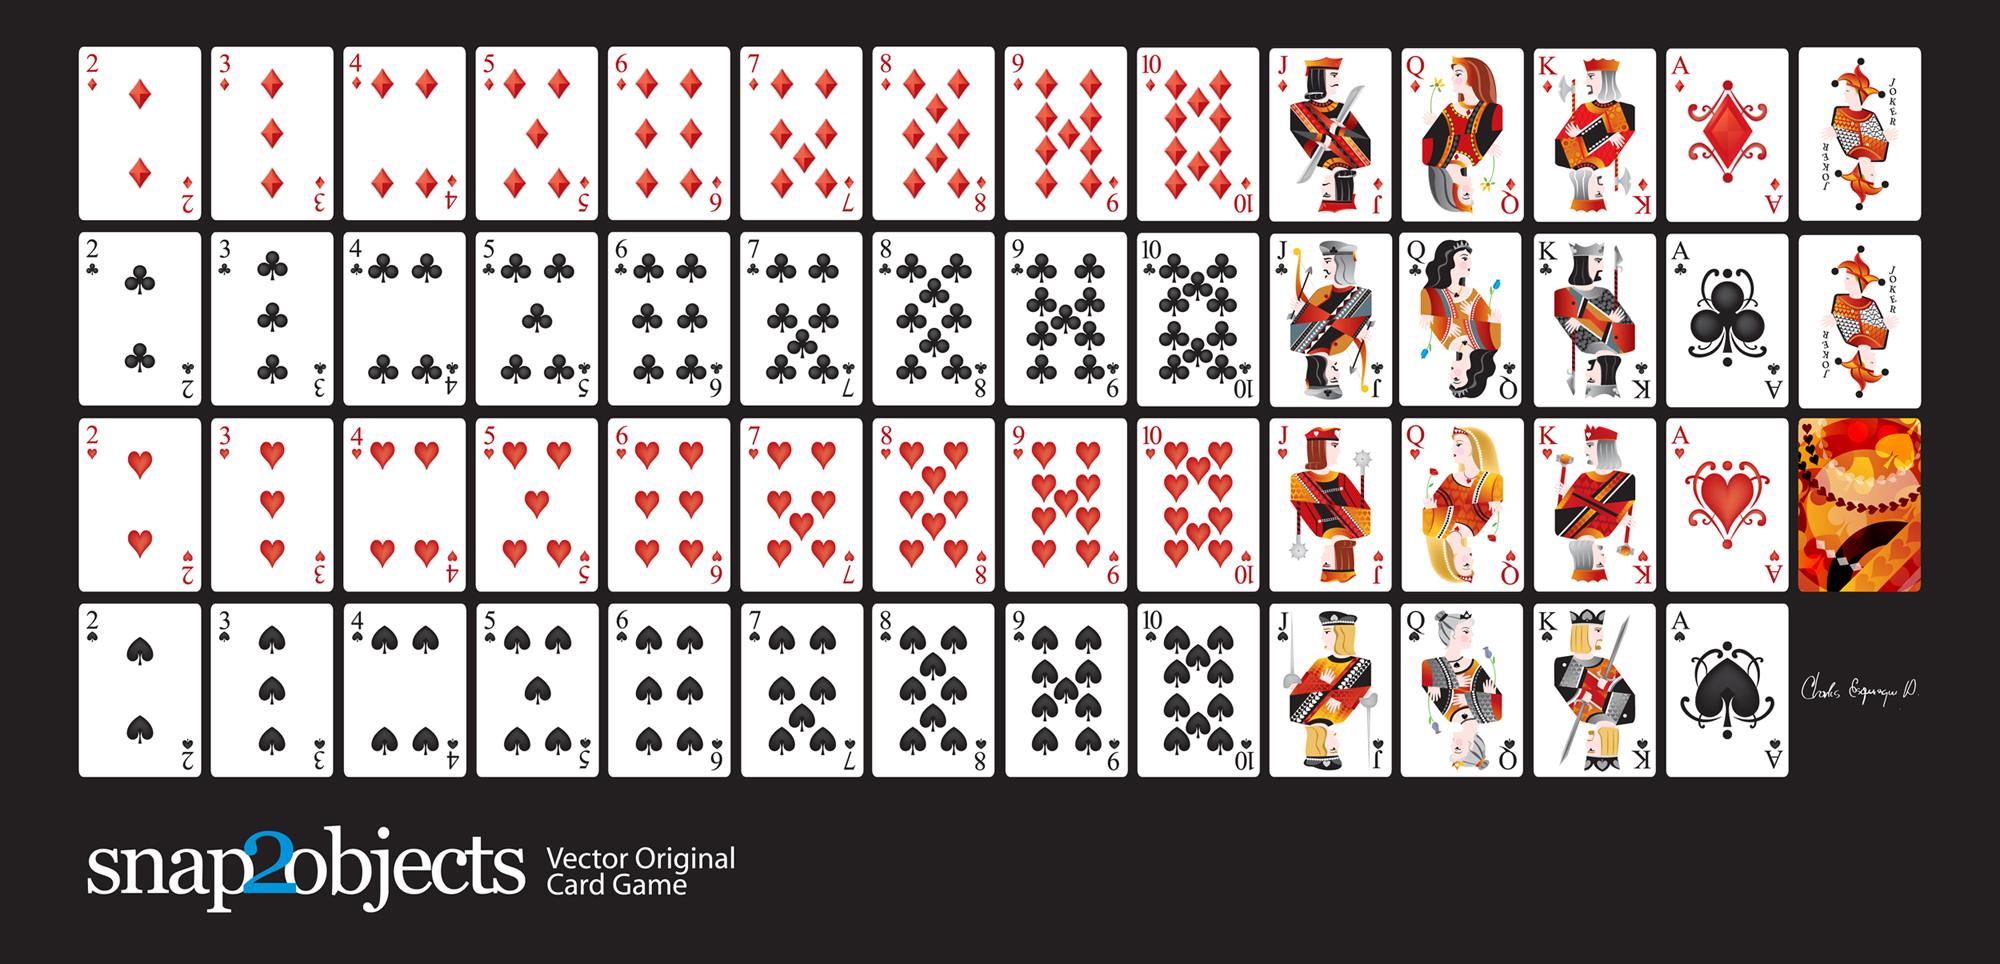 Free Vector Playing Cards Deck | snap2objects